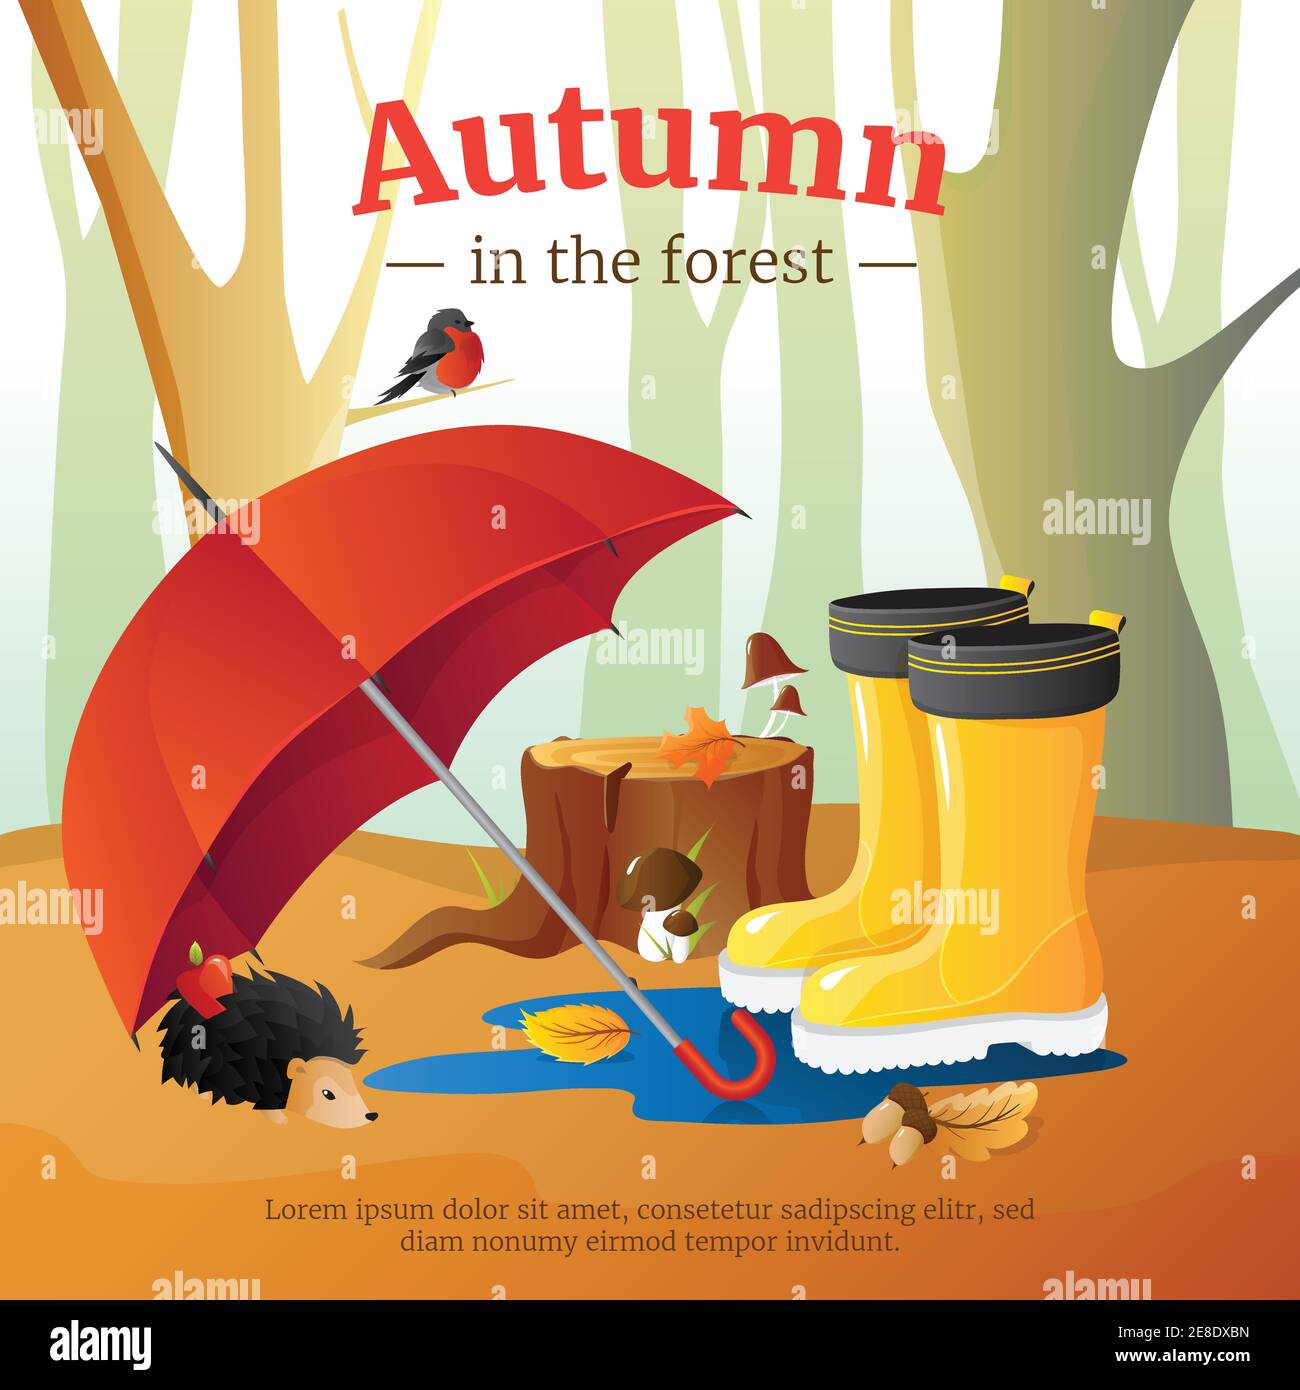 Autumn in forest poster with red umbrella wellingtons and hedgehog with trees trunks background cartoon vector illustration Stock Vector